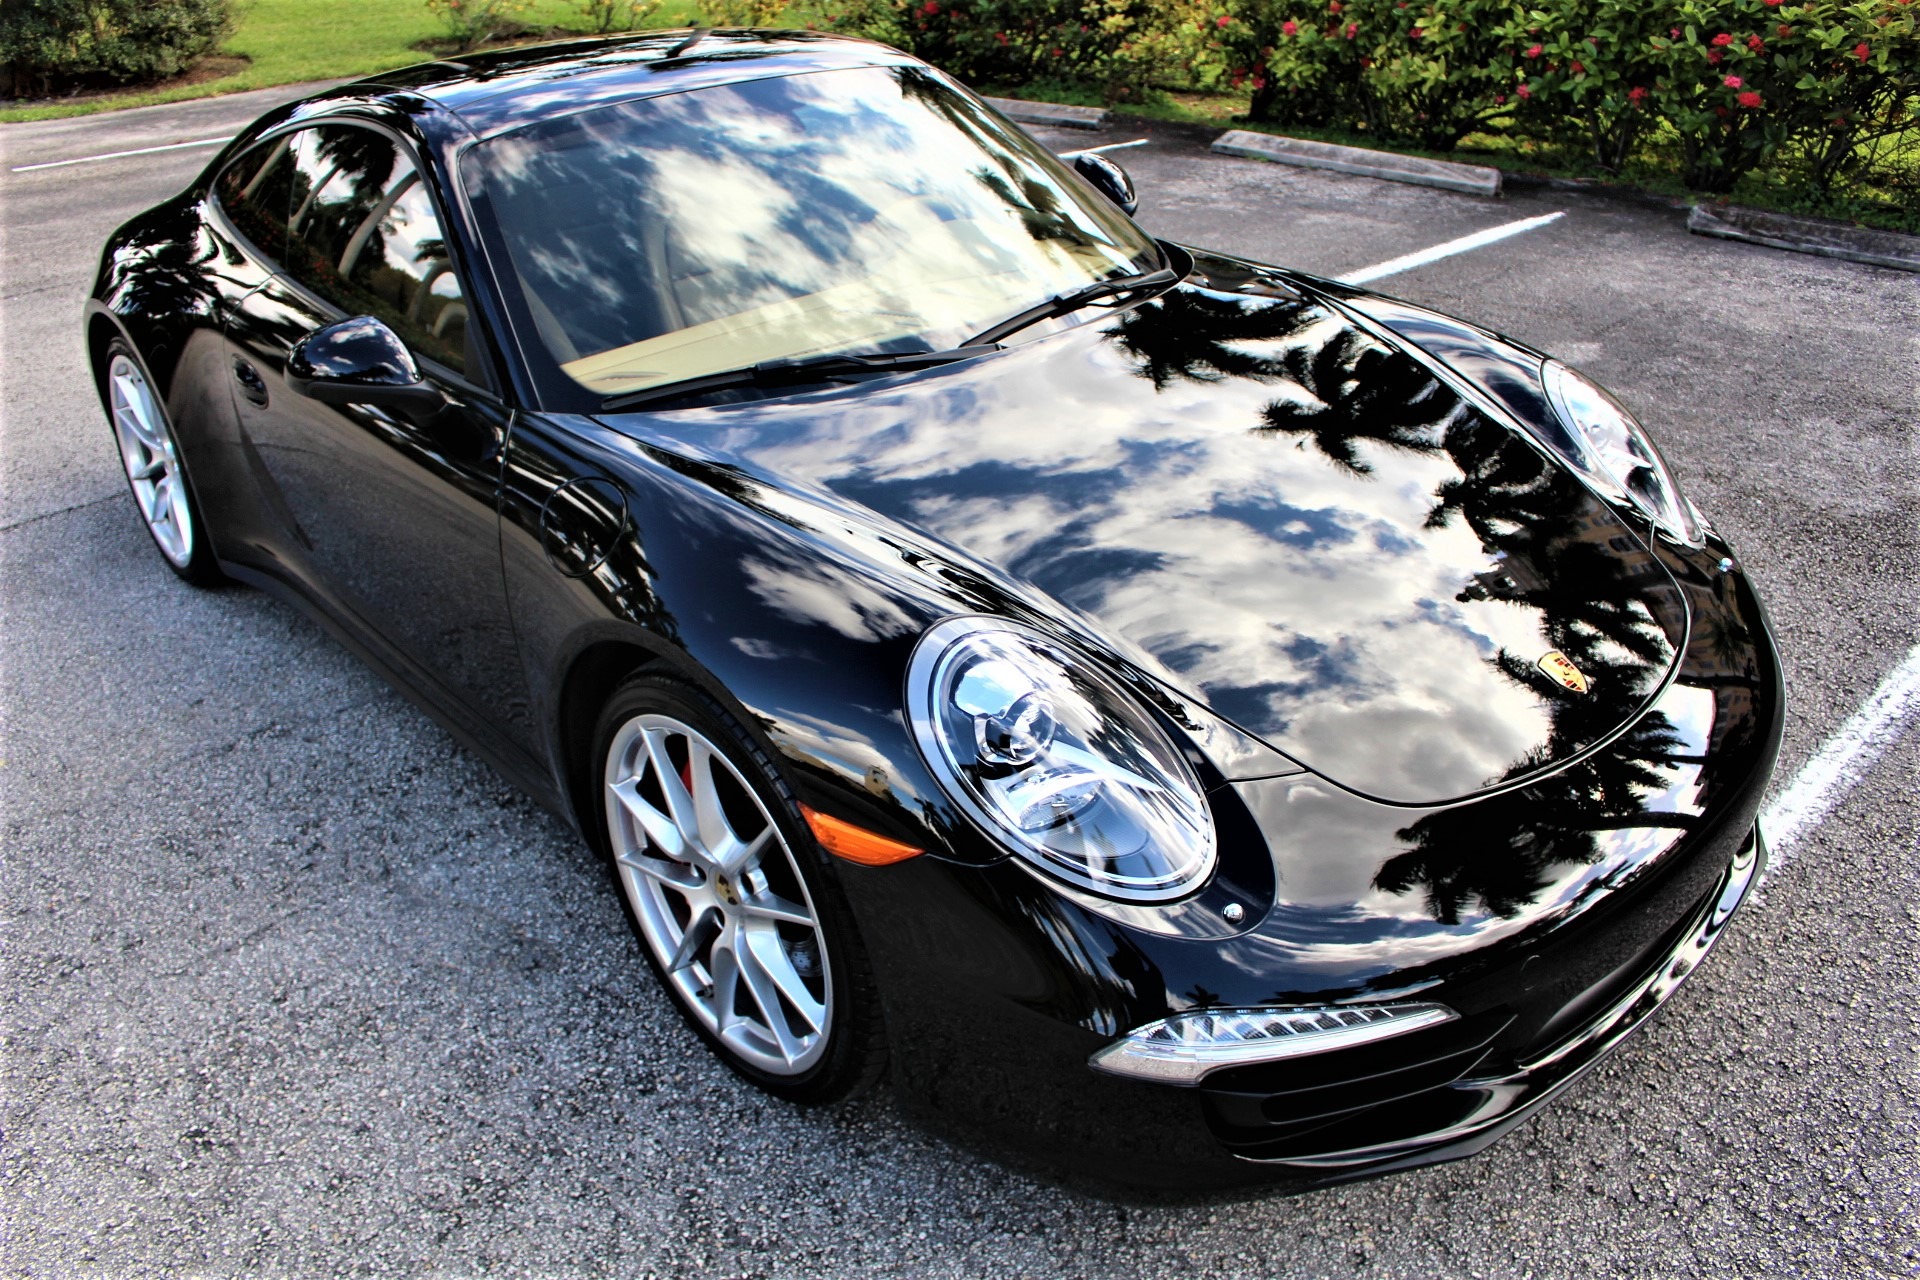 Used 2013 Porsche 911 Carrera 4S for sale Sold at The Gables Sports Cars in Miami FL 33146 3